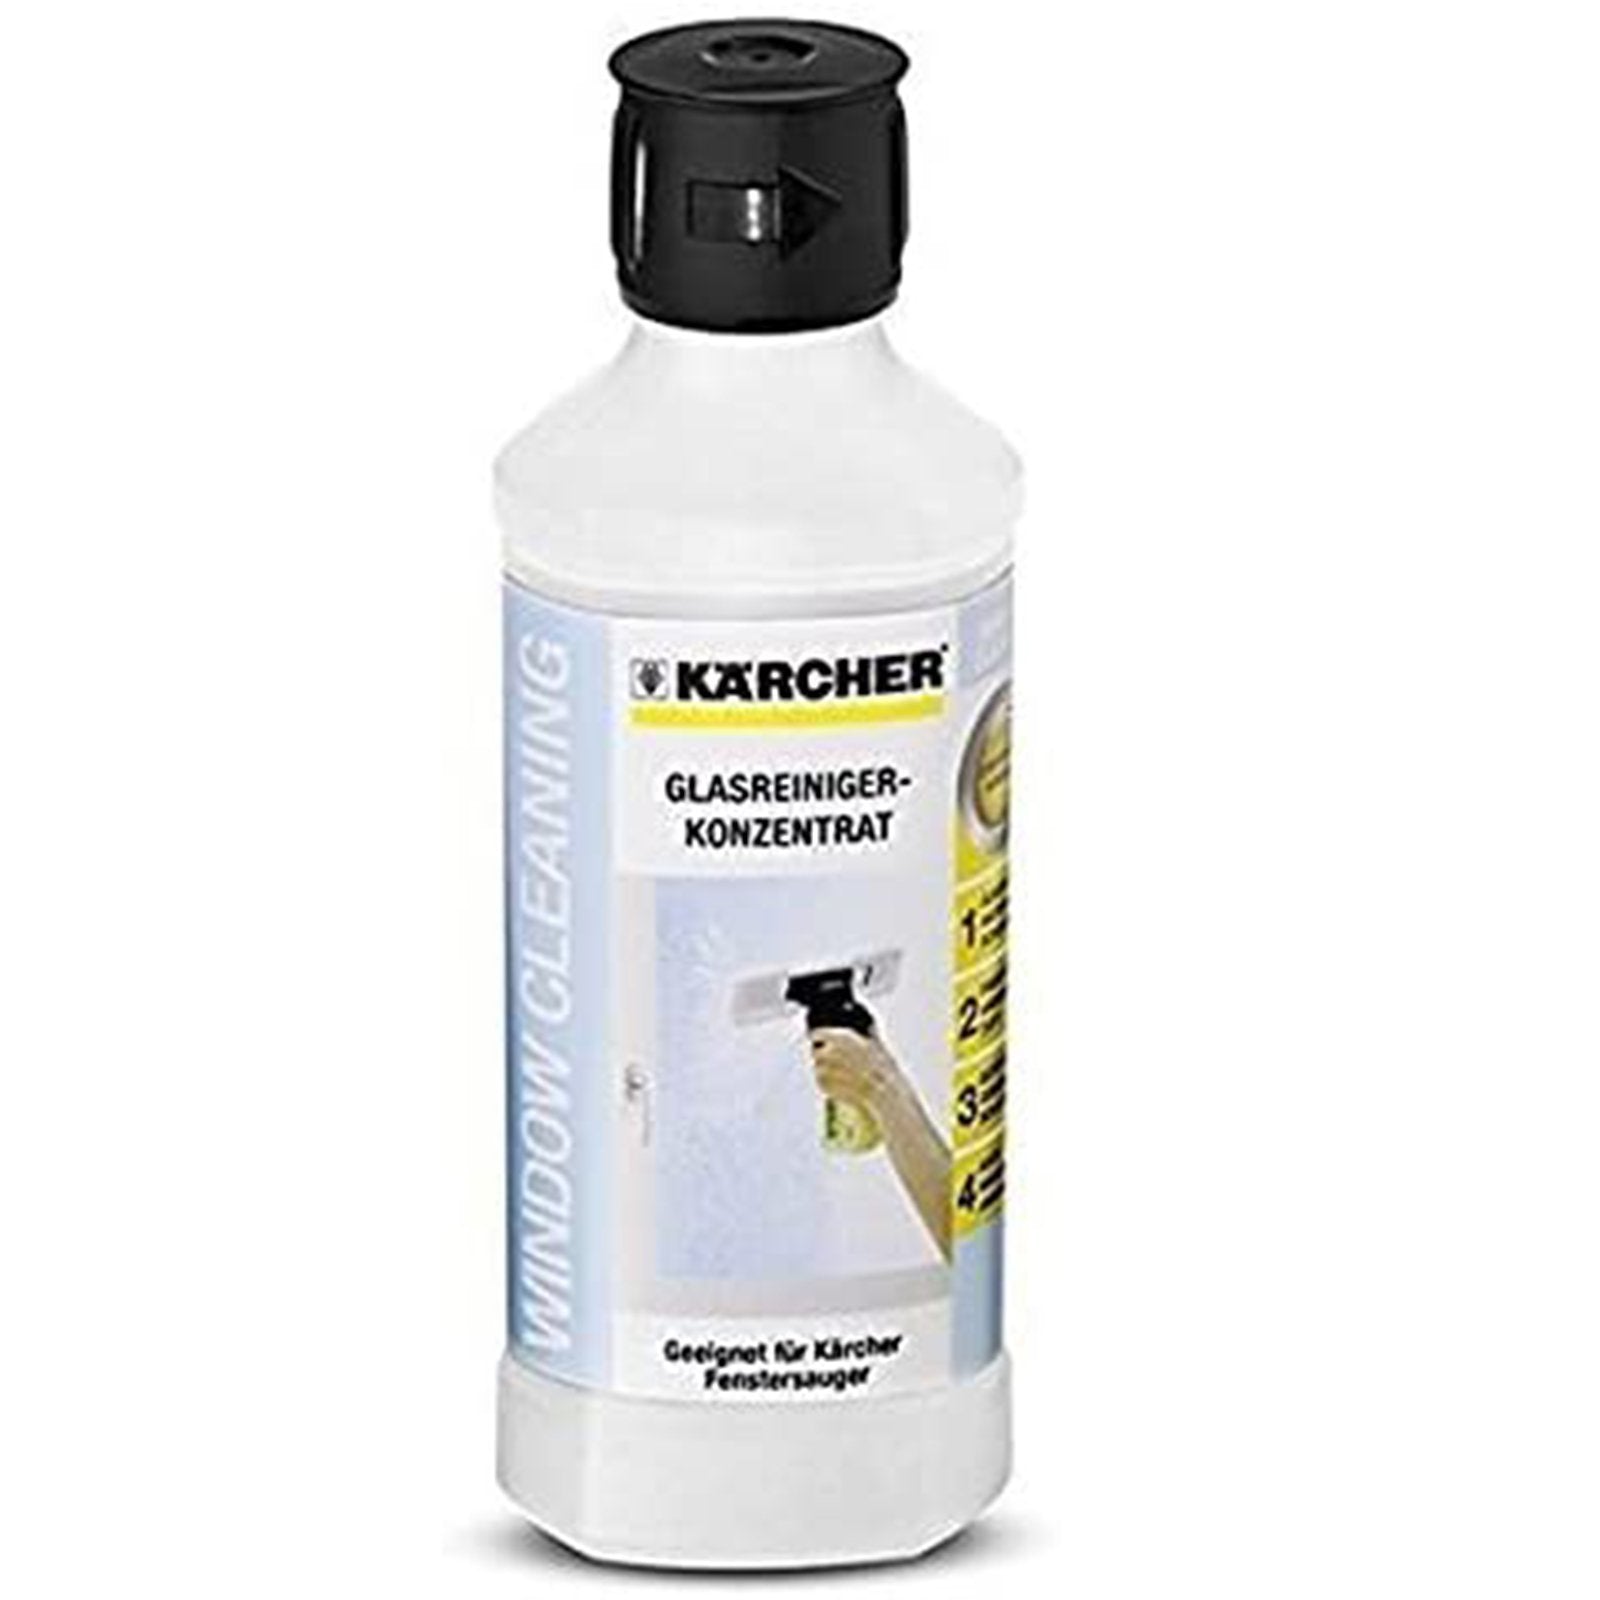 Cloth Pads + Cleaning Fluid for KARCHER Window Vac Vacuum - 4 x Pads + 500ml